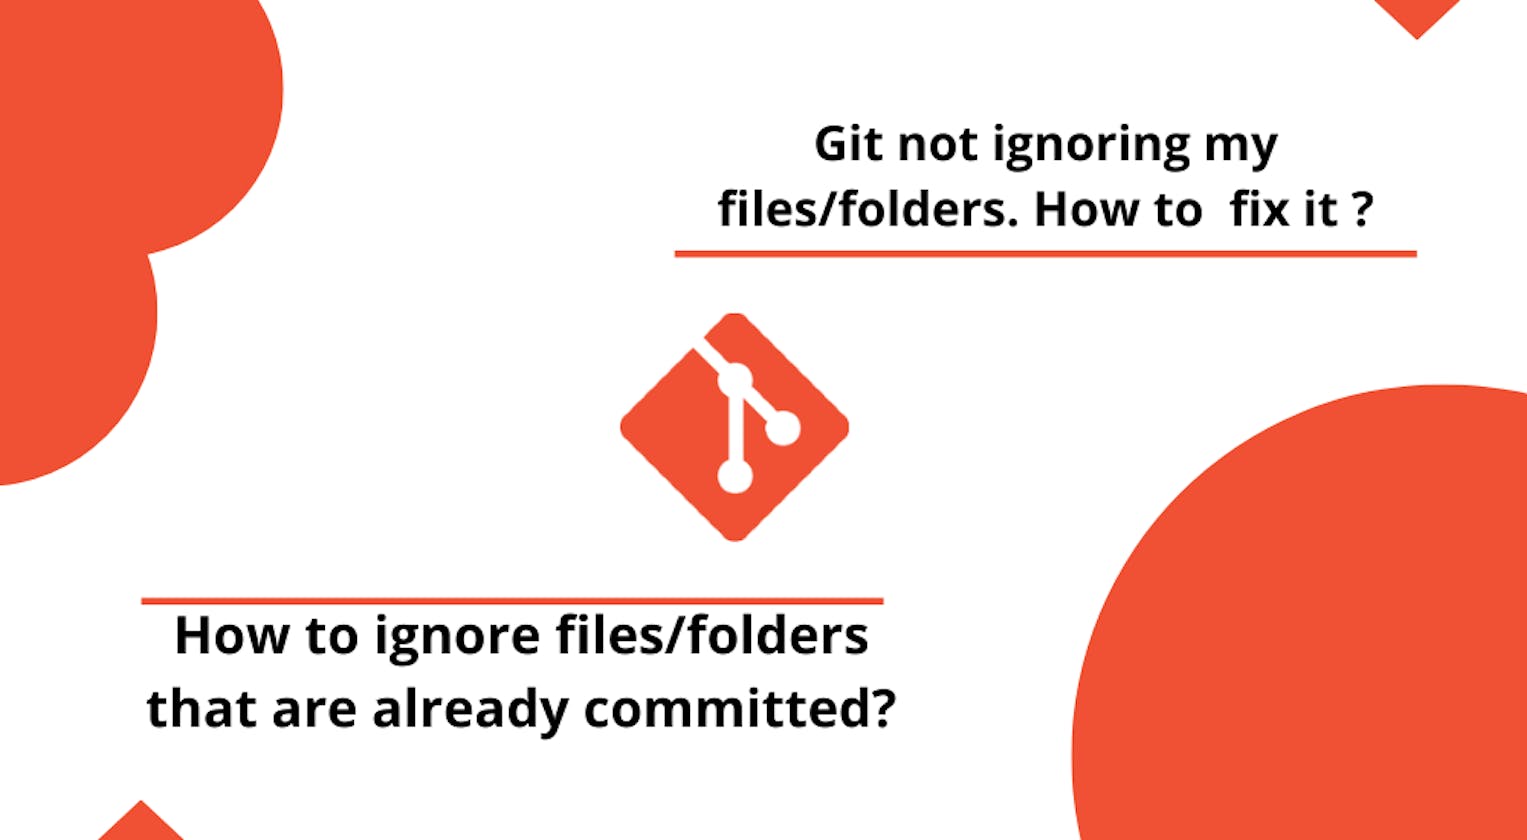 My .gitignore doesn’t work, git not ignoring my files/folders. How to fix it? How to ignore committed files/folders?